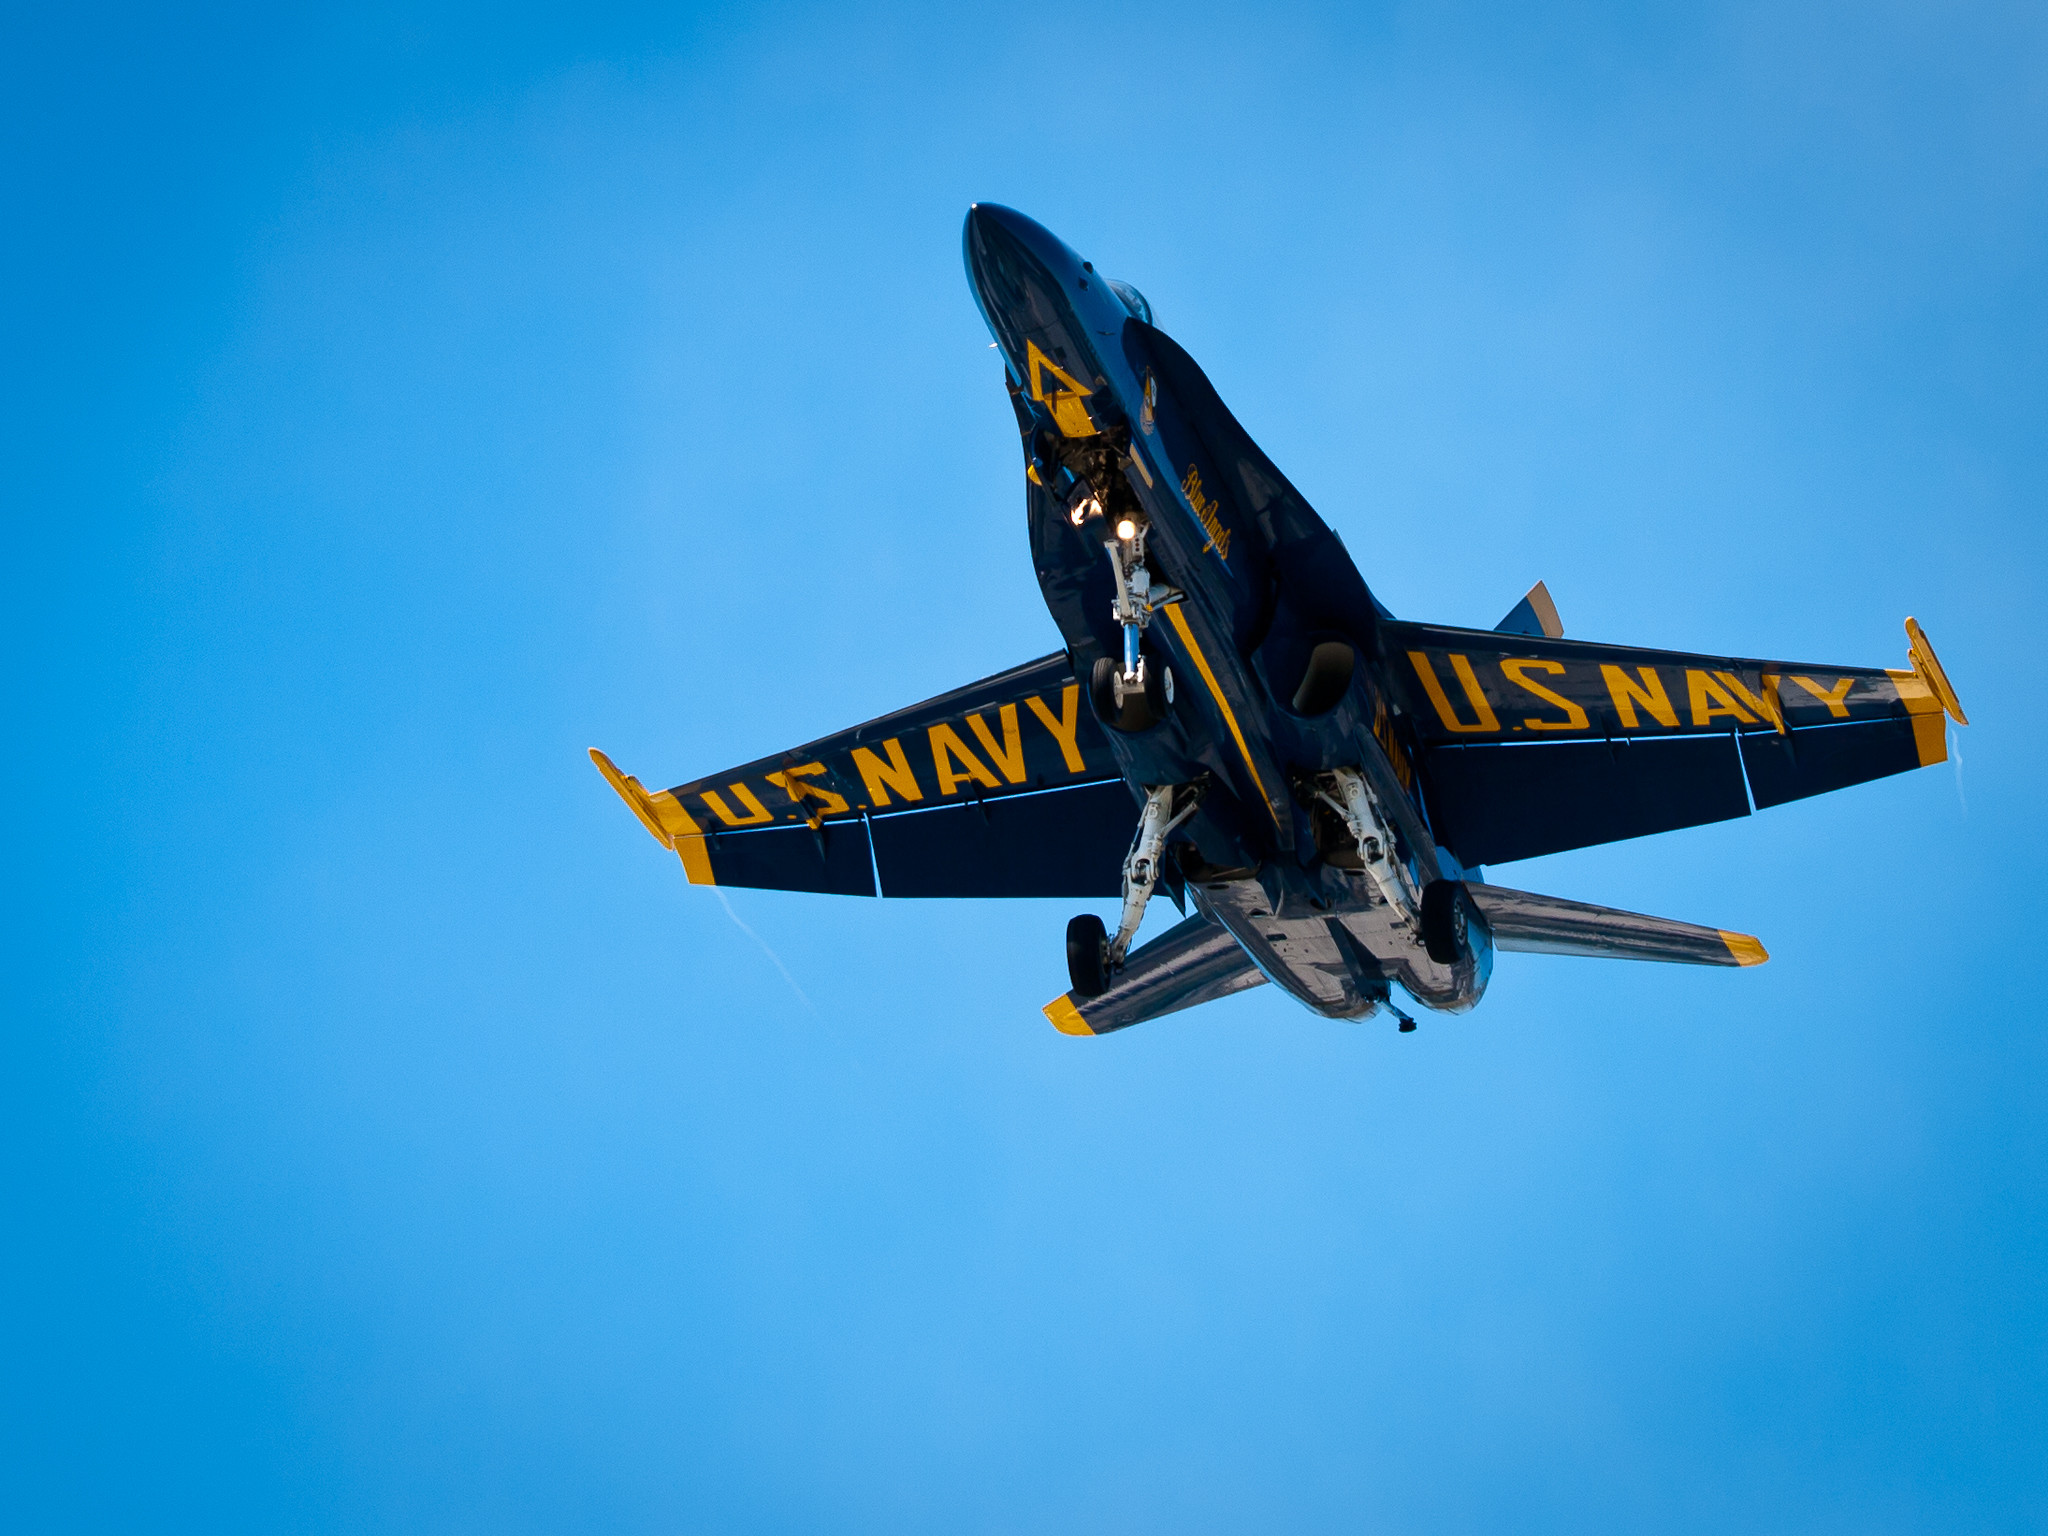 2048x1536 Blue Angels images blue angels HD wallpaper and background photos